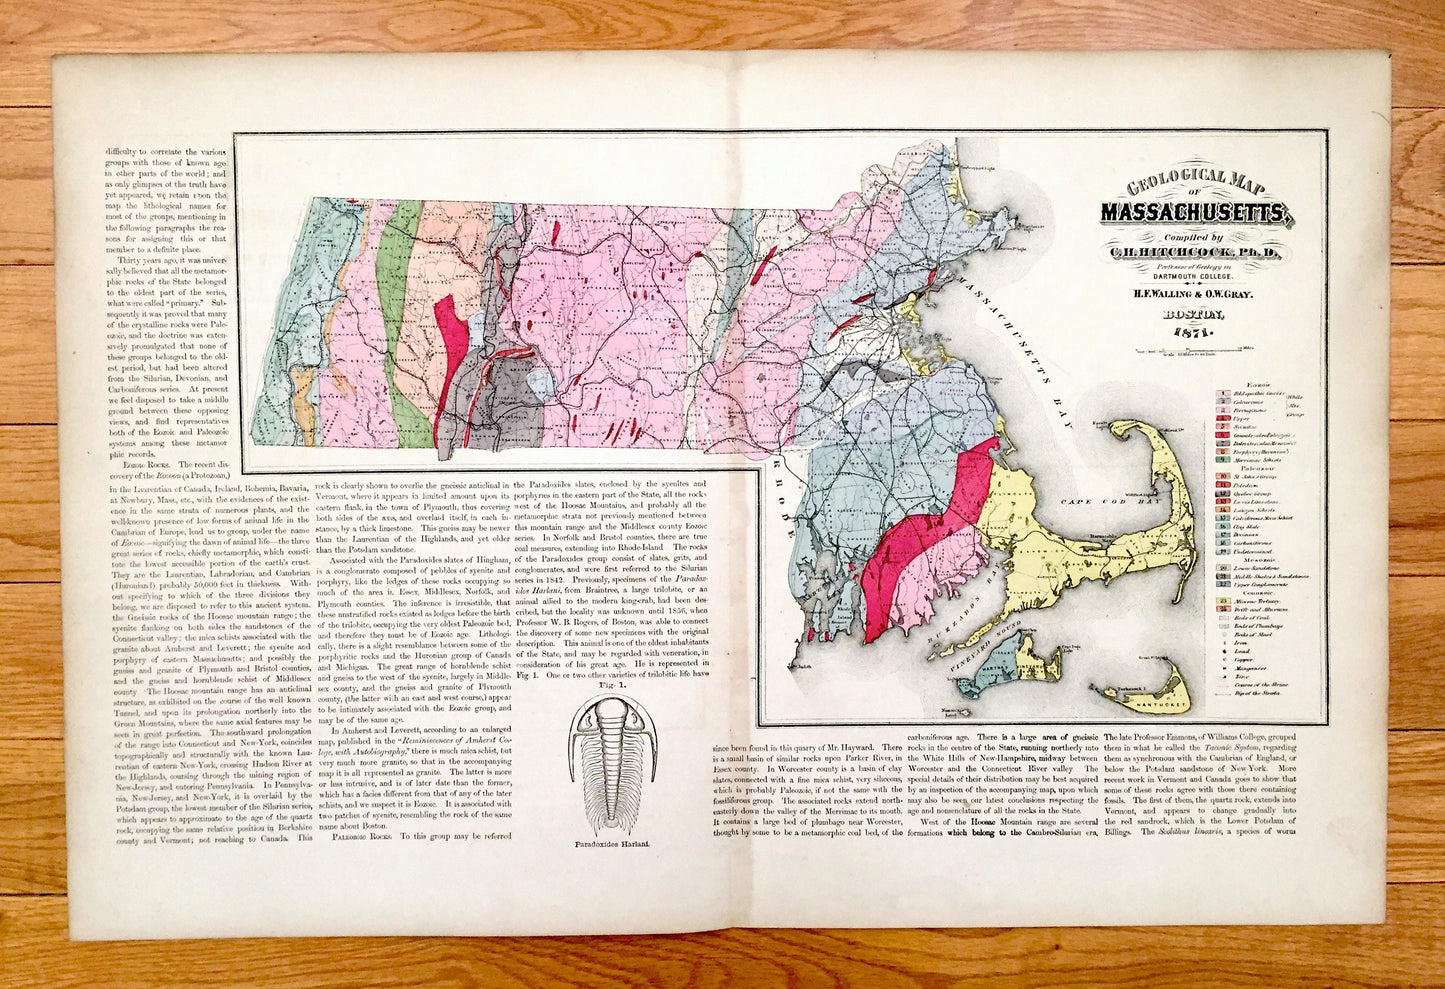 Antique 1871 Massachusetts Topographical Map from Stedman Brown & Lyon Atlas – Walling and Gray, Boston, Cape Cod, Berkshires, Middlesex, MA